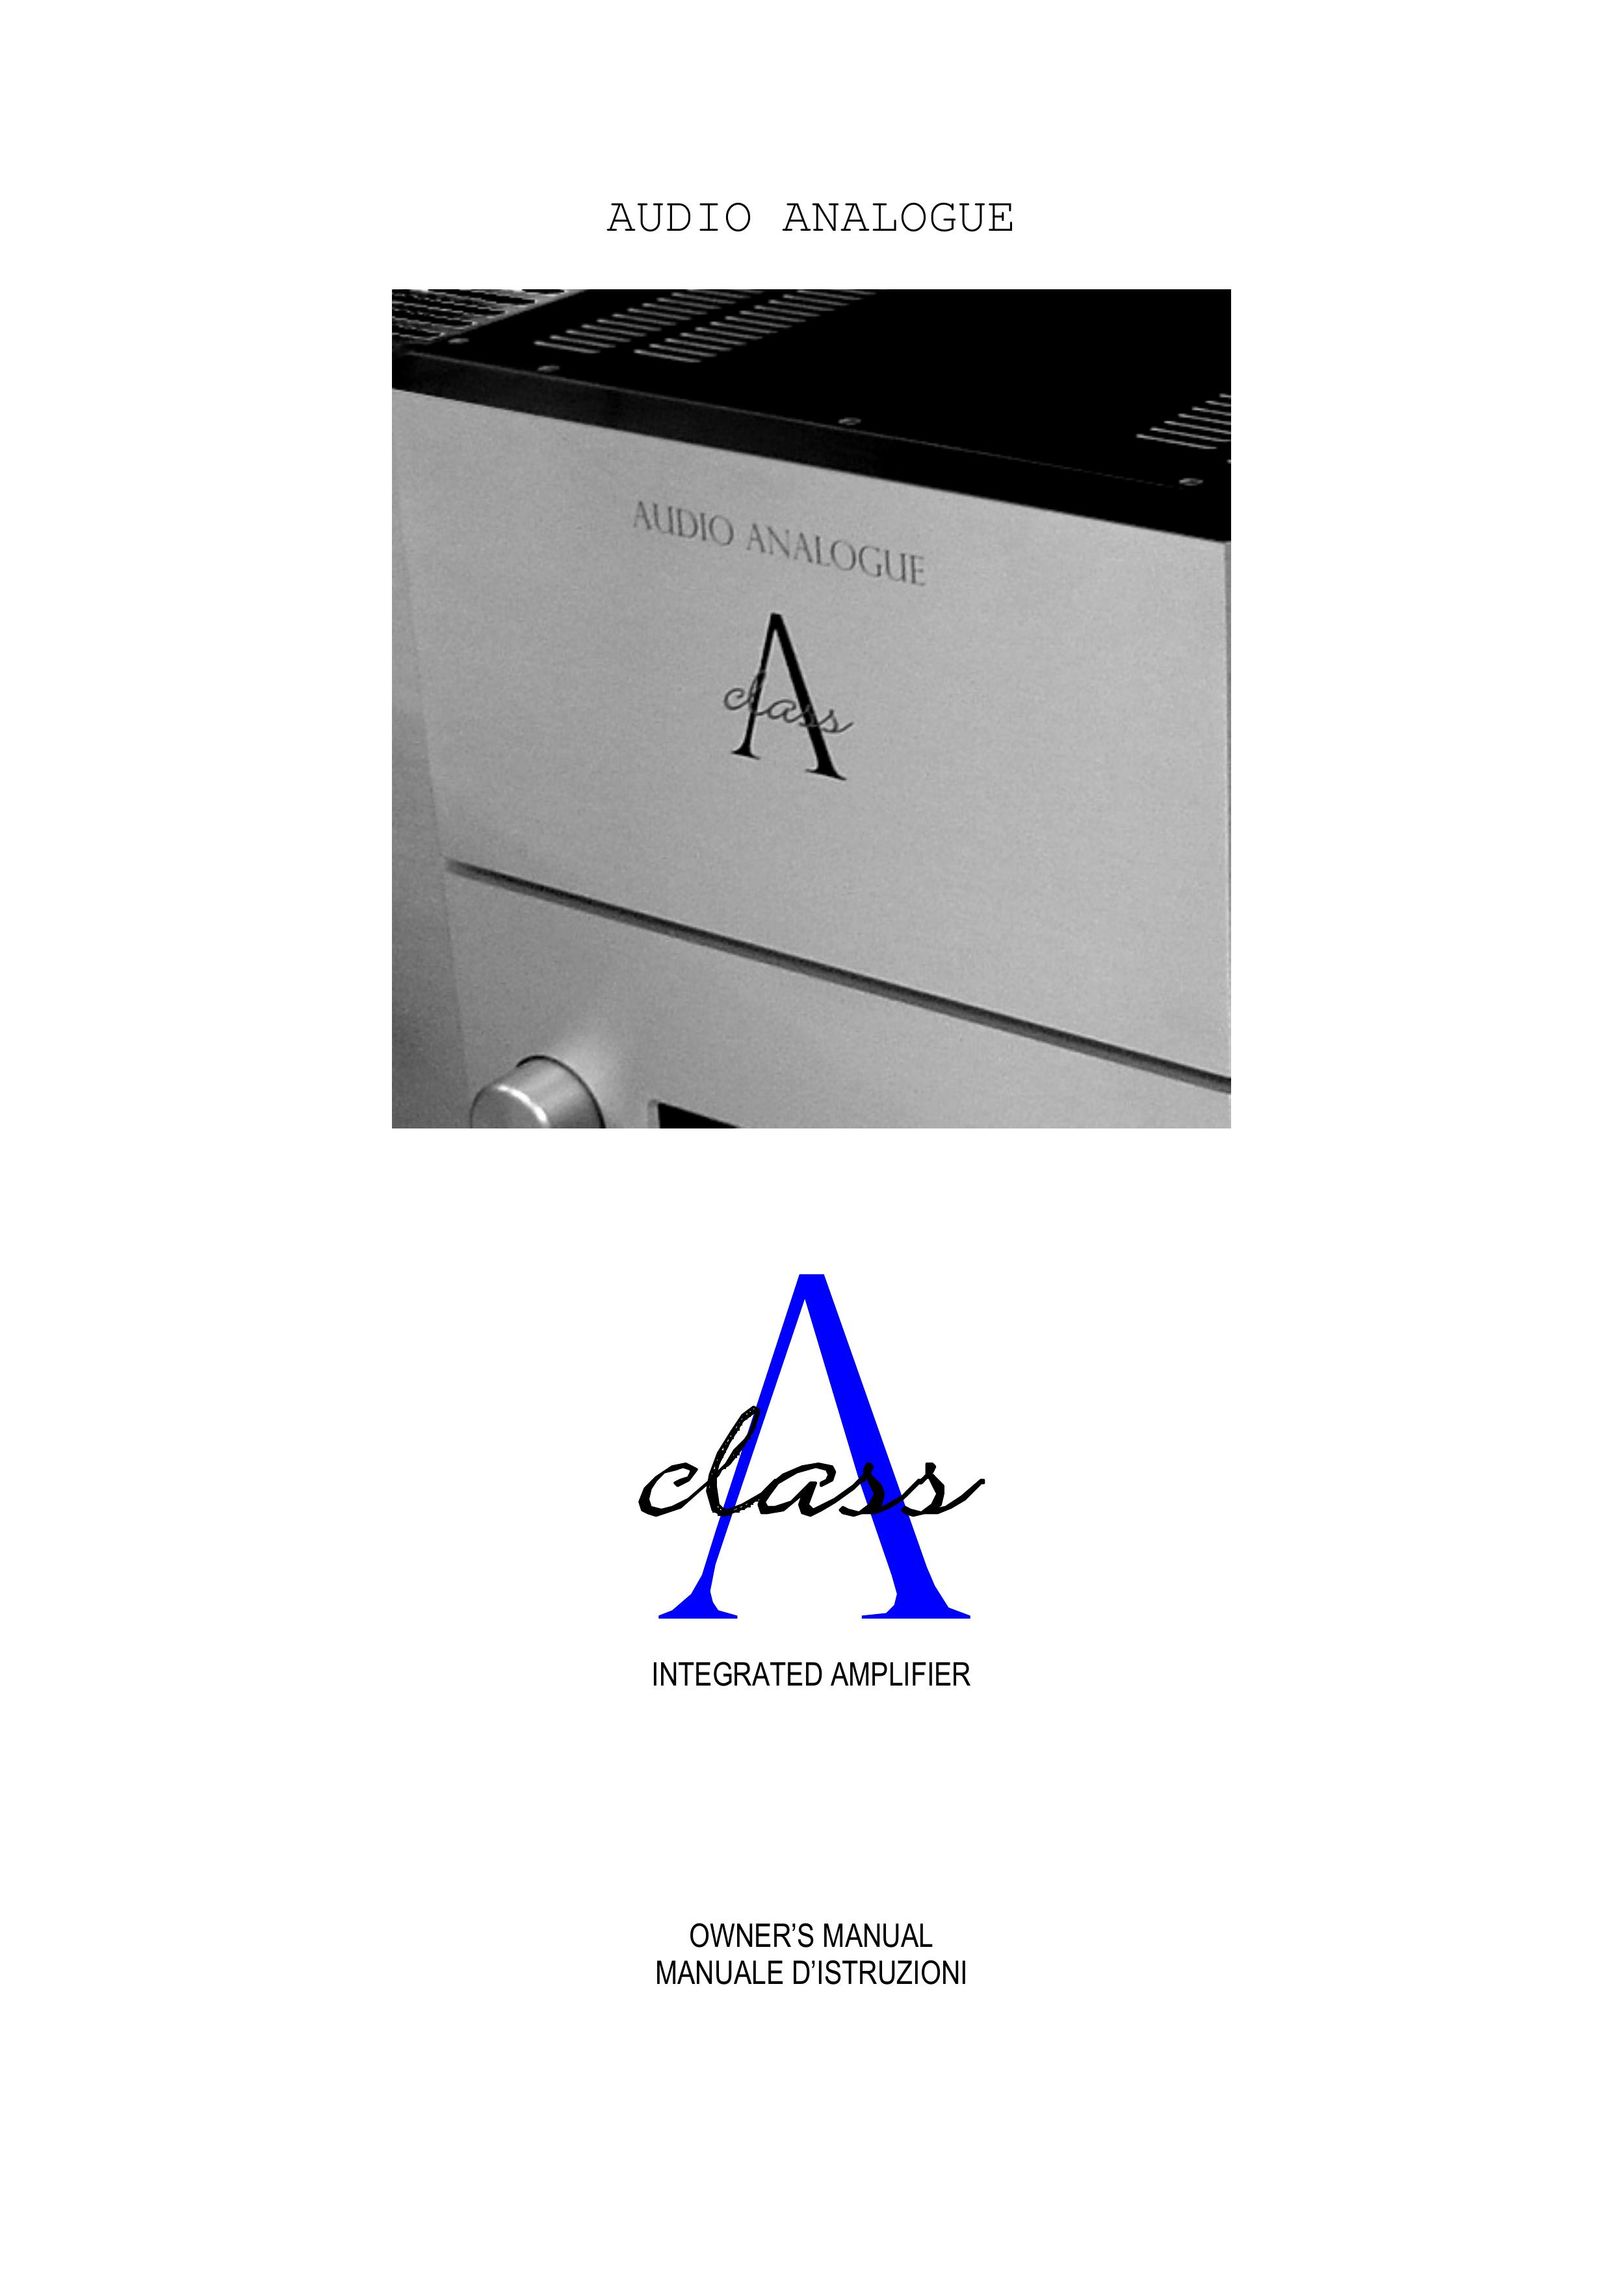 Audio Analogue SRL AUDIO ANALOGUE INTEGRATED AMPLIFIER Stereo Amplifier User Manual